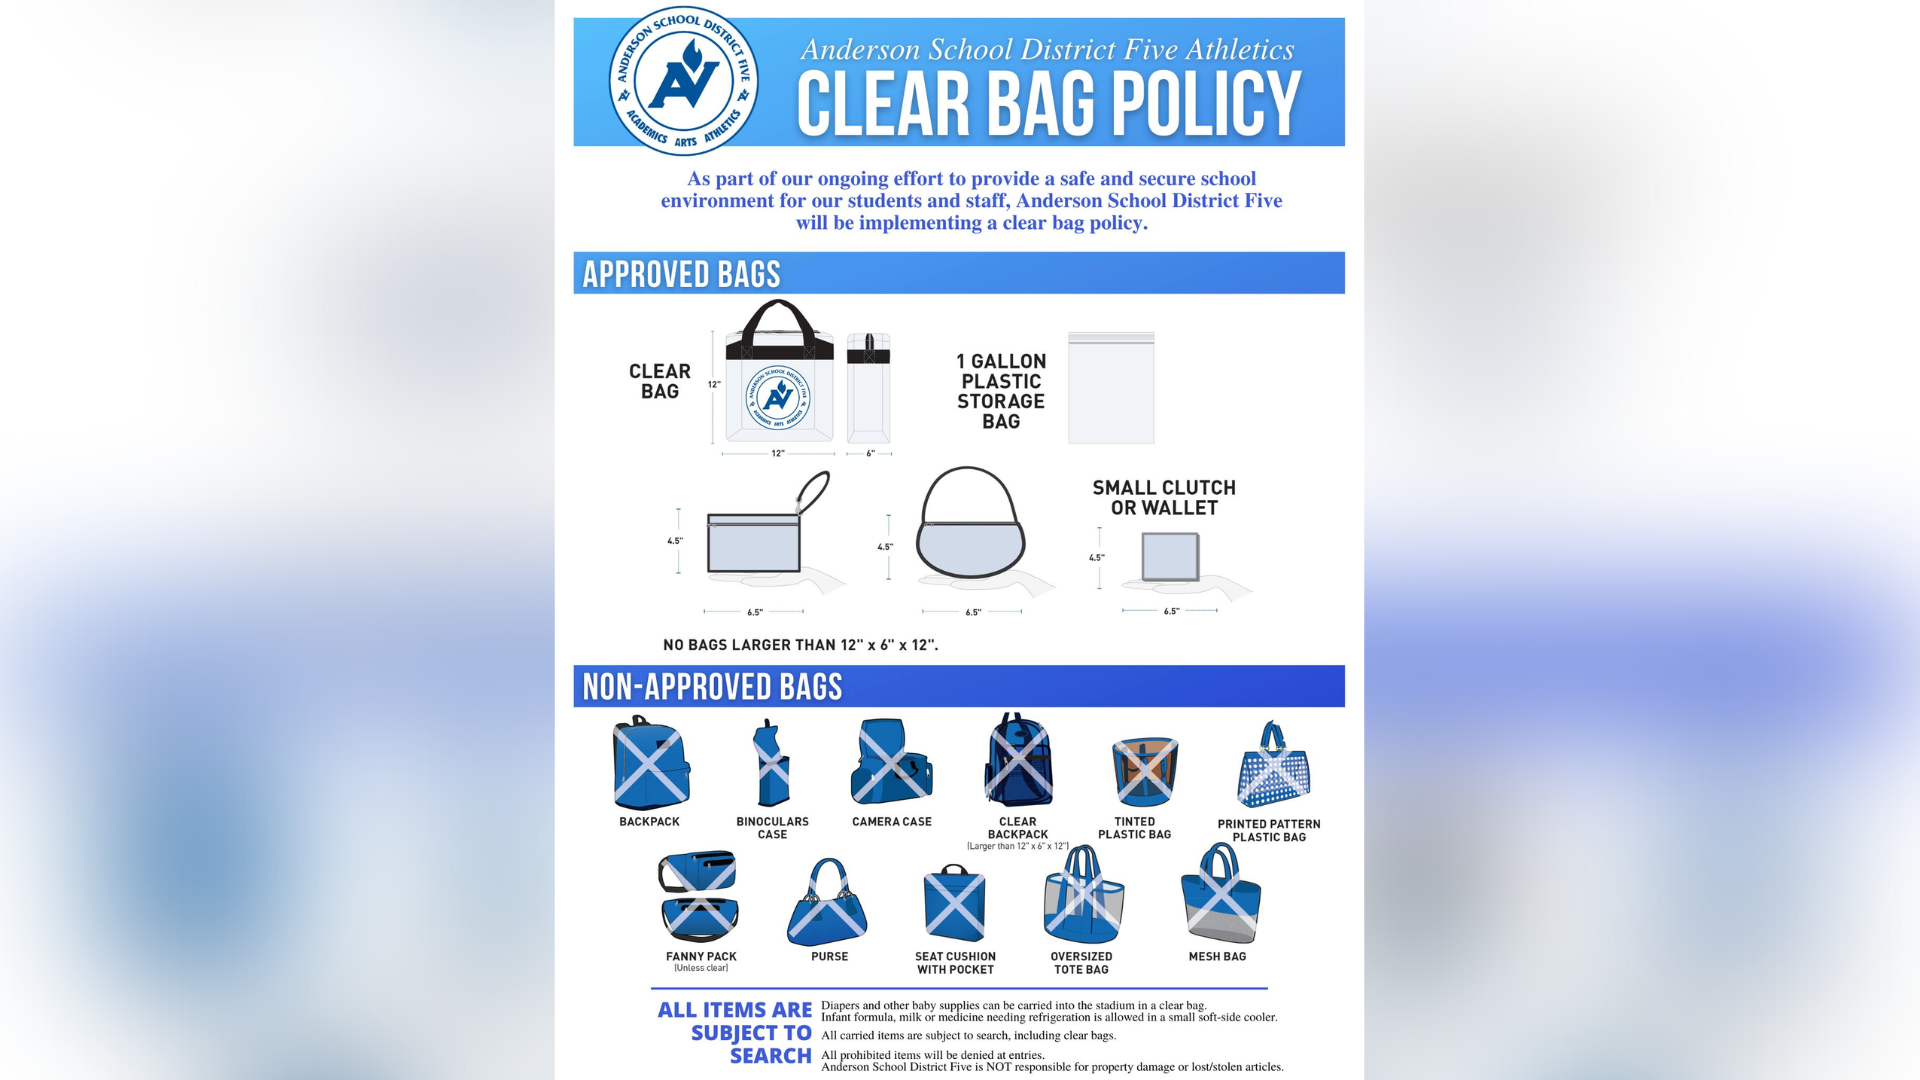 Spartanburg Co. District 3 implements clear bag policy